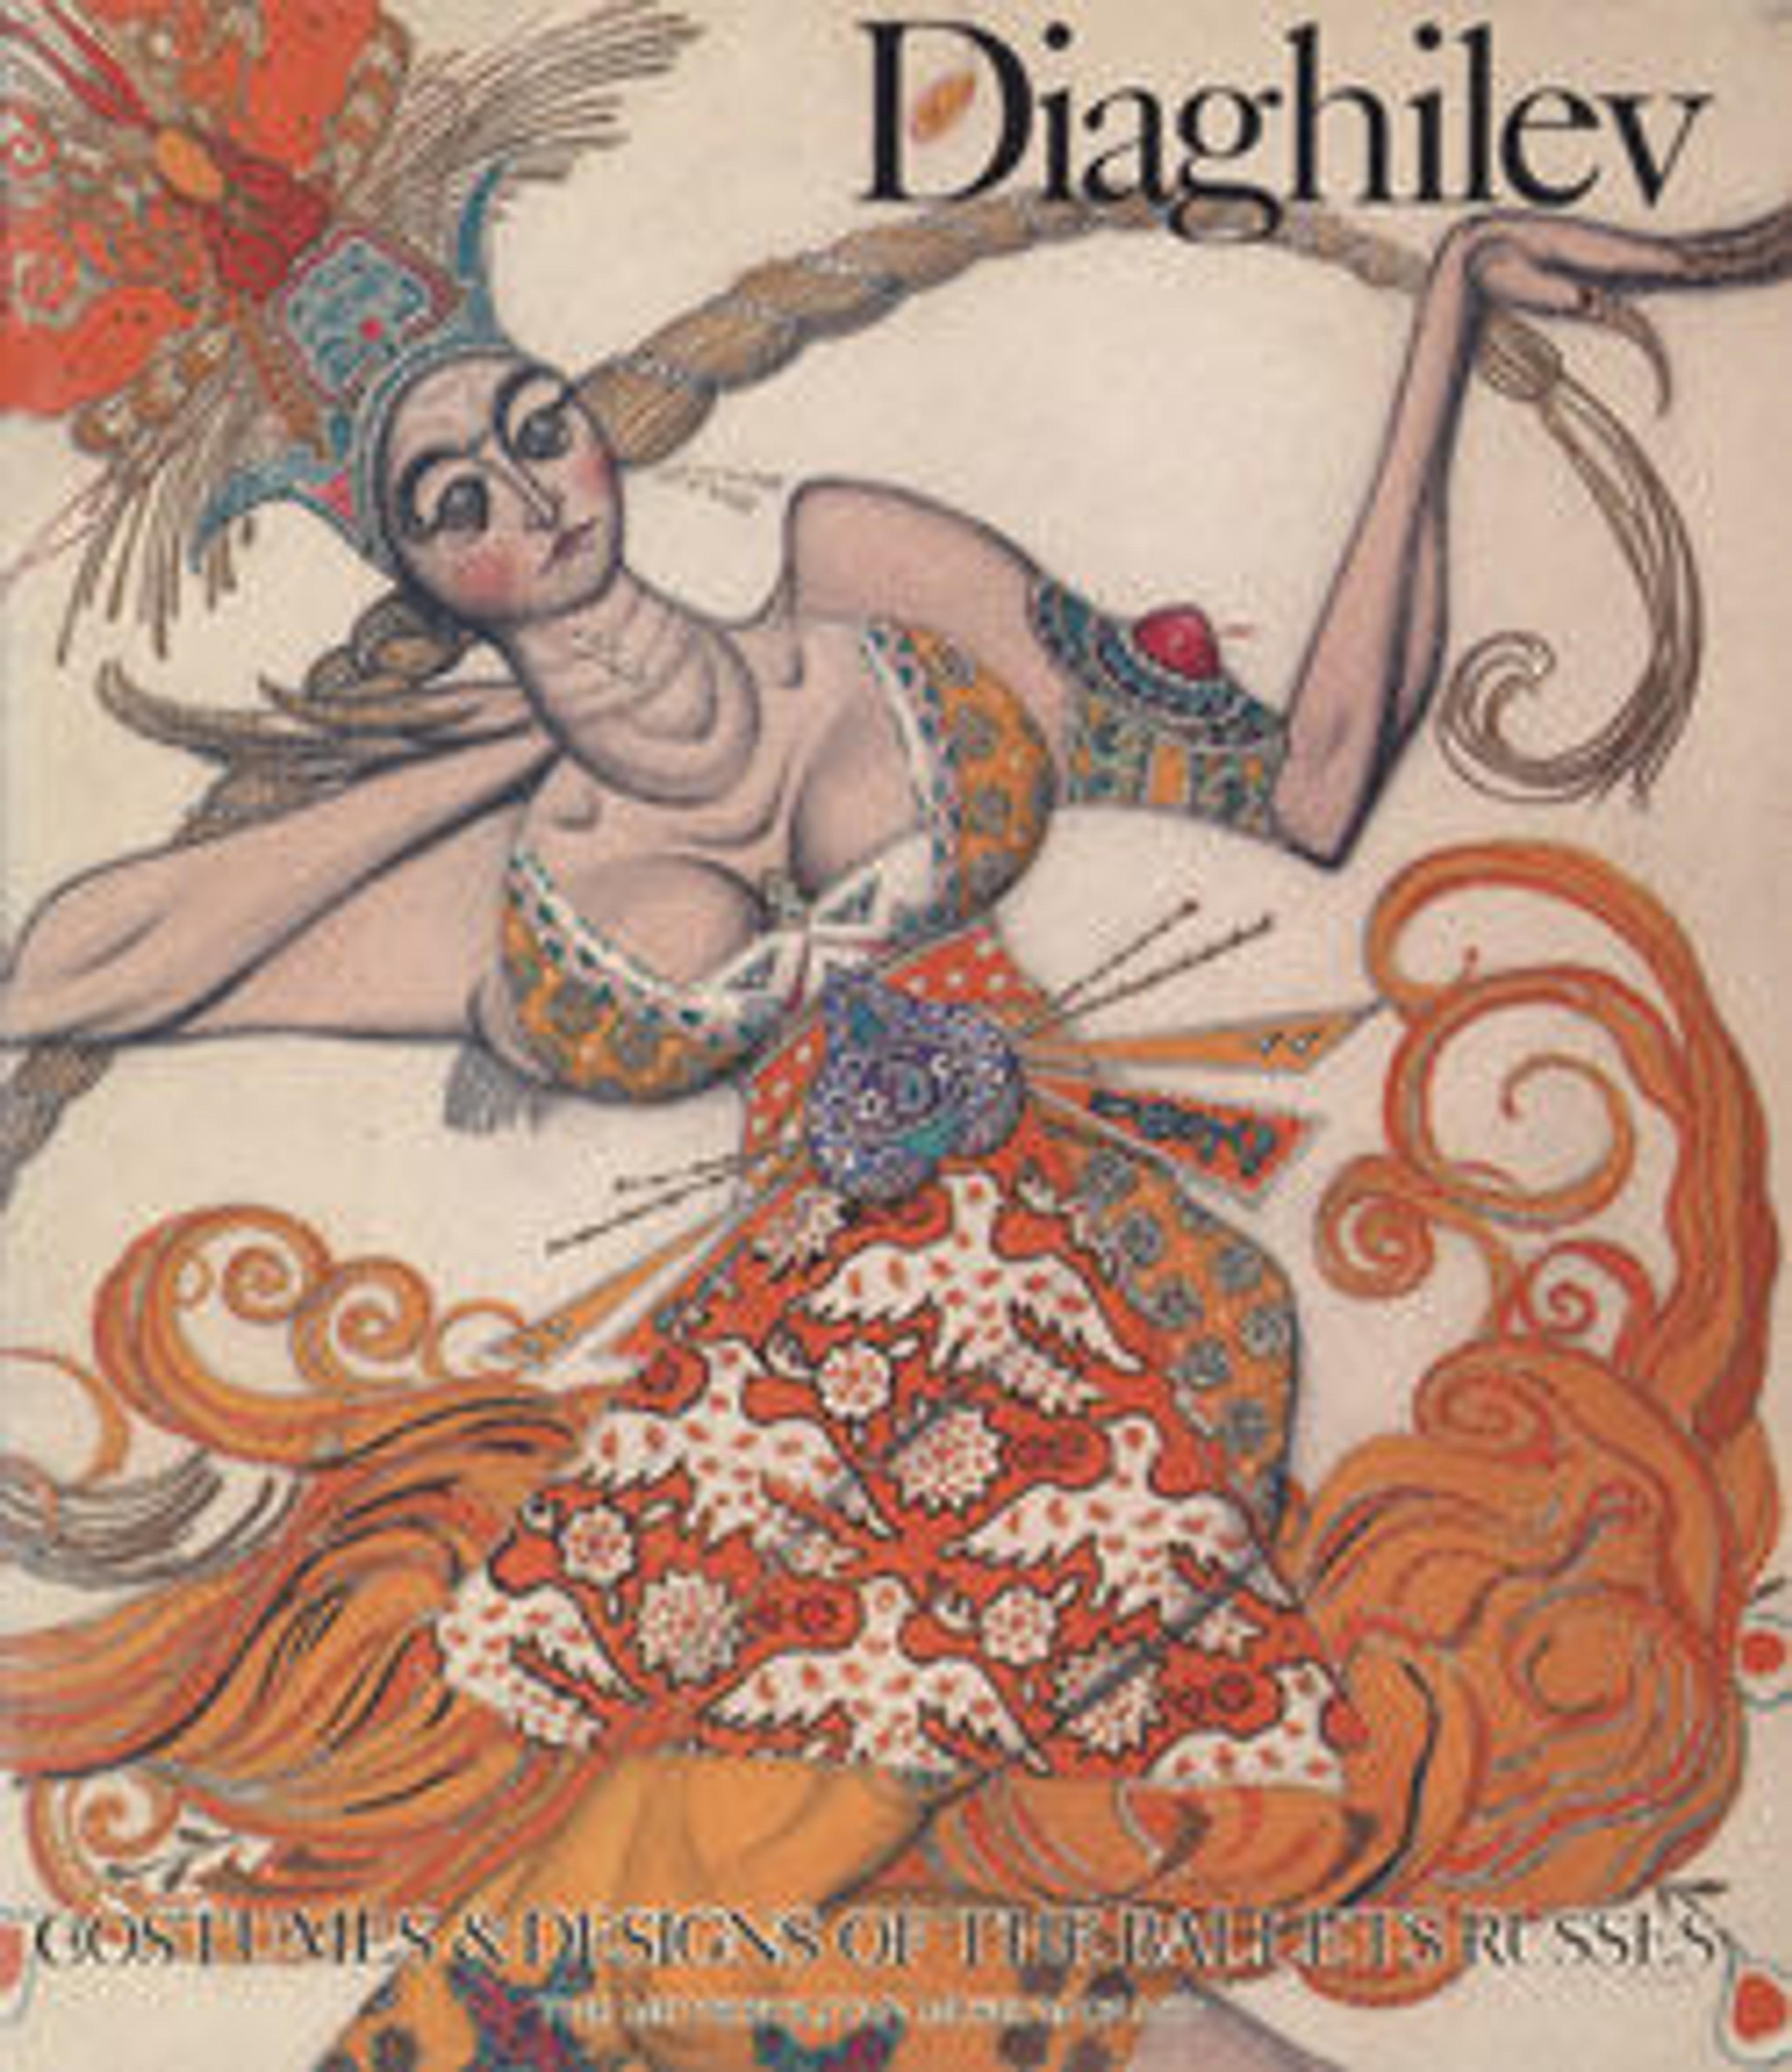 Diaghilev: Costumes and Designs of the Ballets Russes